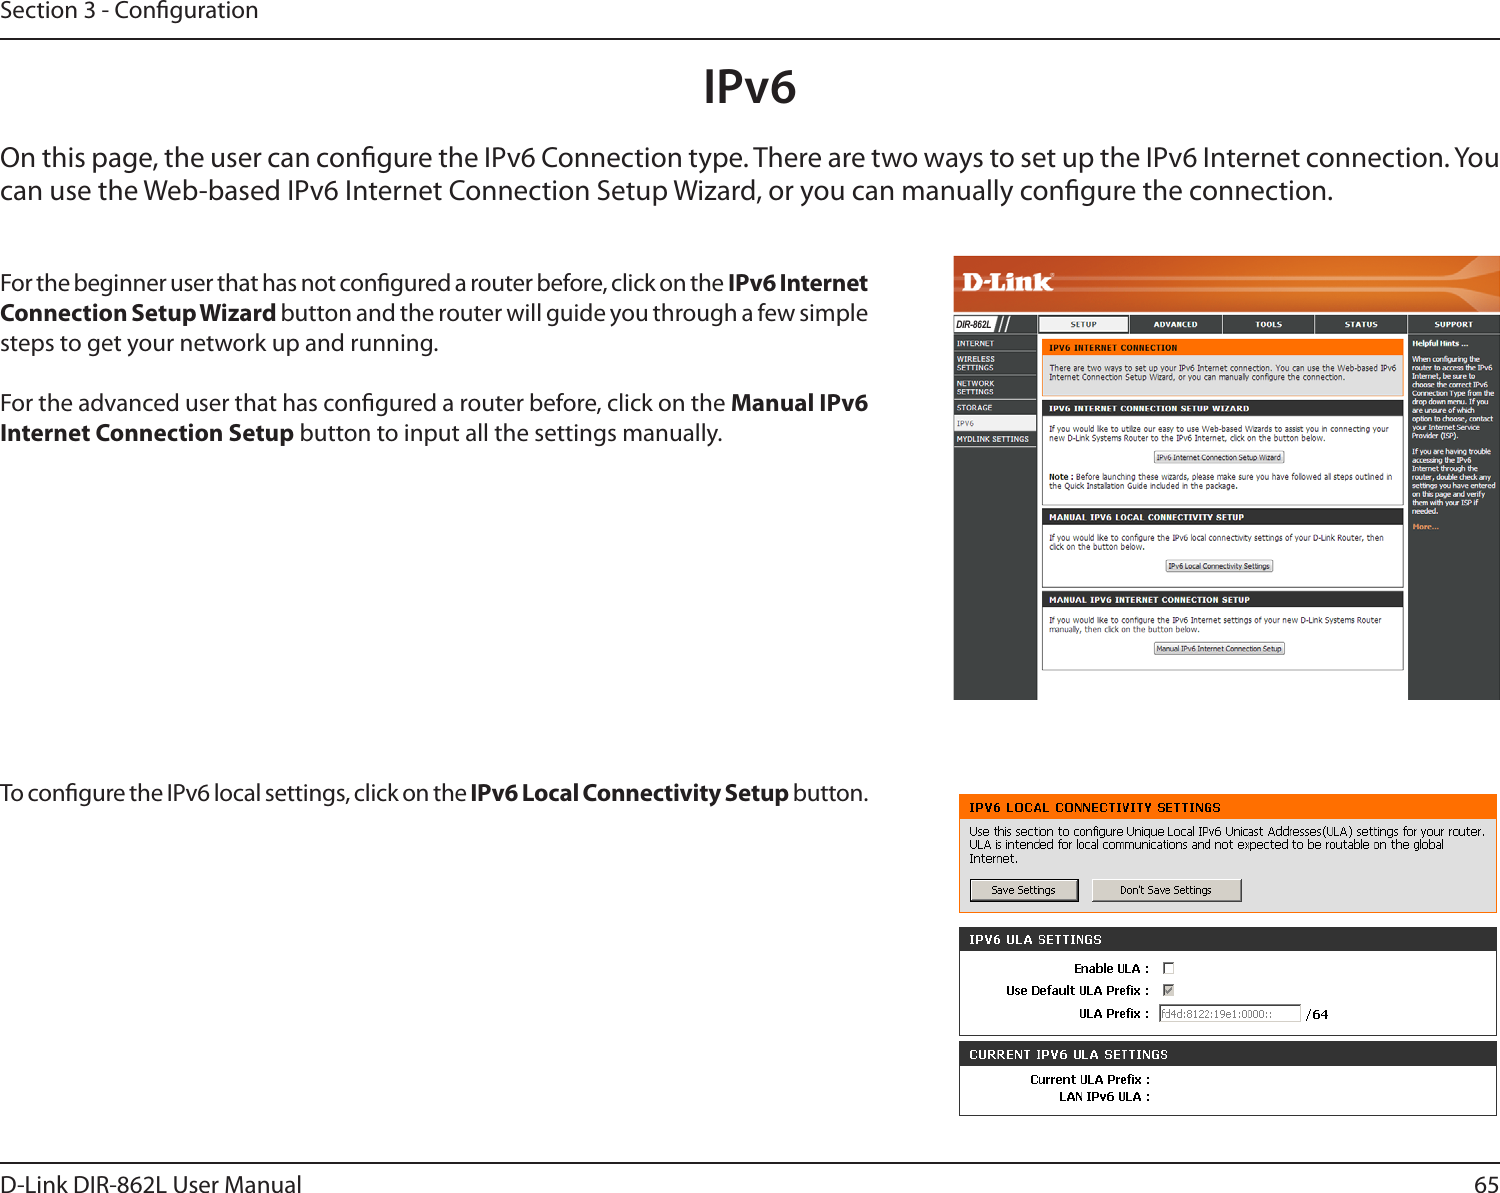 65D-Link DIR-862L User ManualSection 3 - CongurationIPv6On this page, the user can congure the IPv6 Connection type. There are two ways to set up the IPv6 Internet connection. You can use the Web-based IPv6 Internet Connection Setup Wizard, or you can manually congure the connection.For the beginner user that has not congured a router before, click on the IPv6 Internet Connection Setup Wizard button and the router will guide you through a few simple steps to get your network up and running.For the advanced user that has congured a router before, click on the Manual IPv6 Internet Connection Setup button to input all the settings manually.To congure the IPv6 local settings, click on the IPv6 Local Connectivity Setup button.DIR-862L